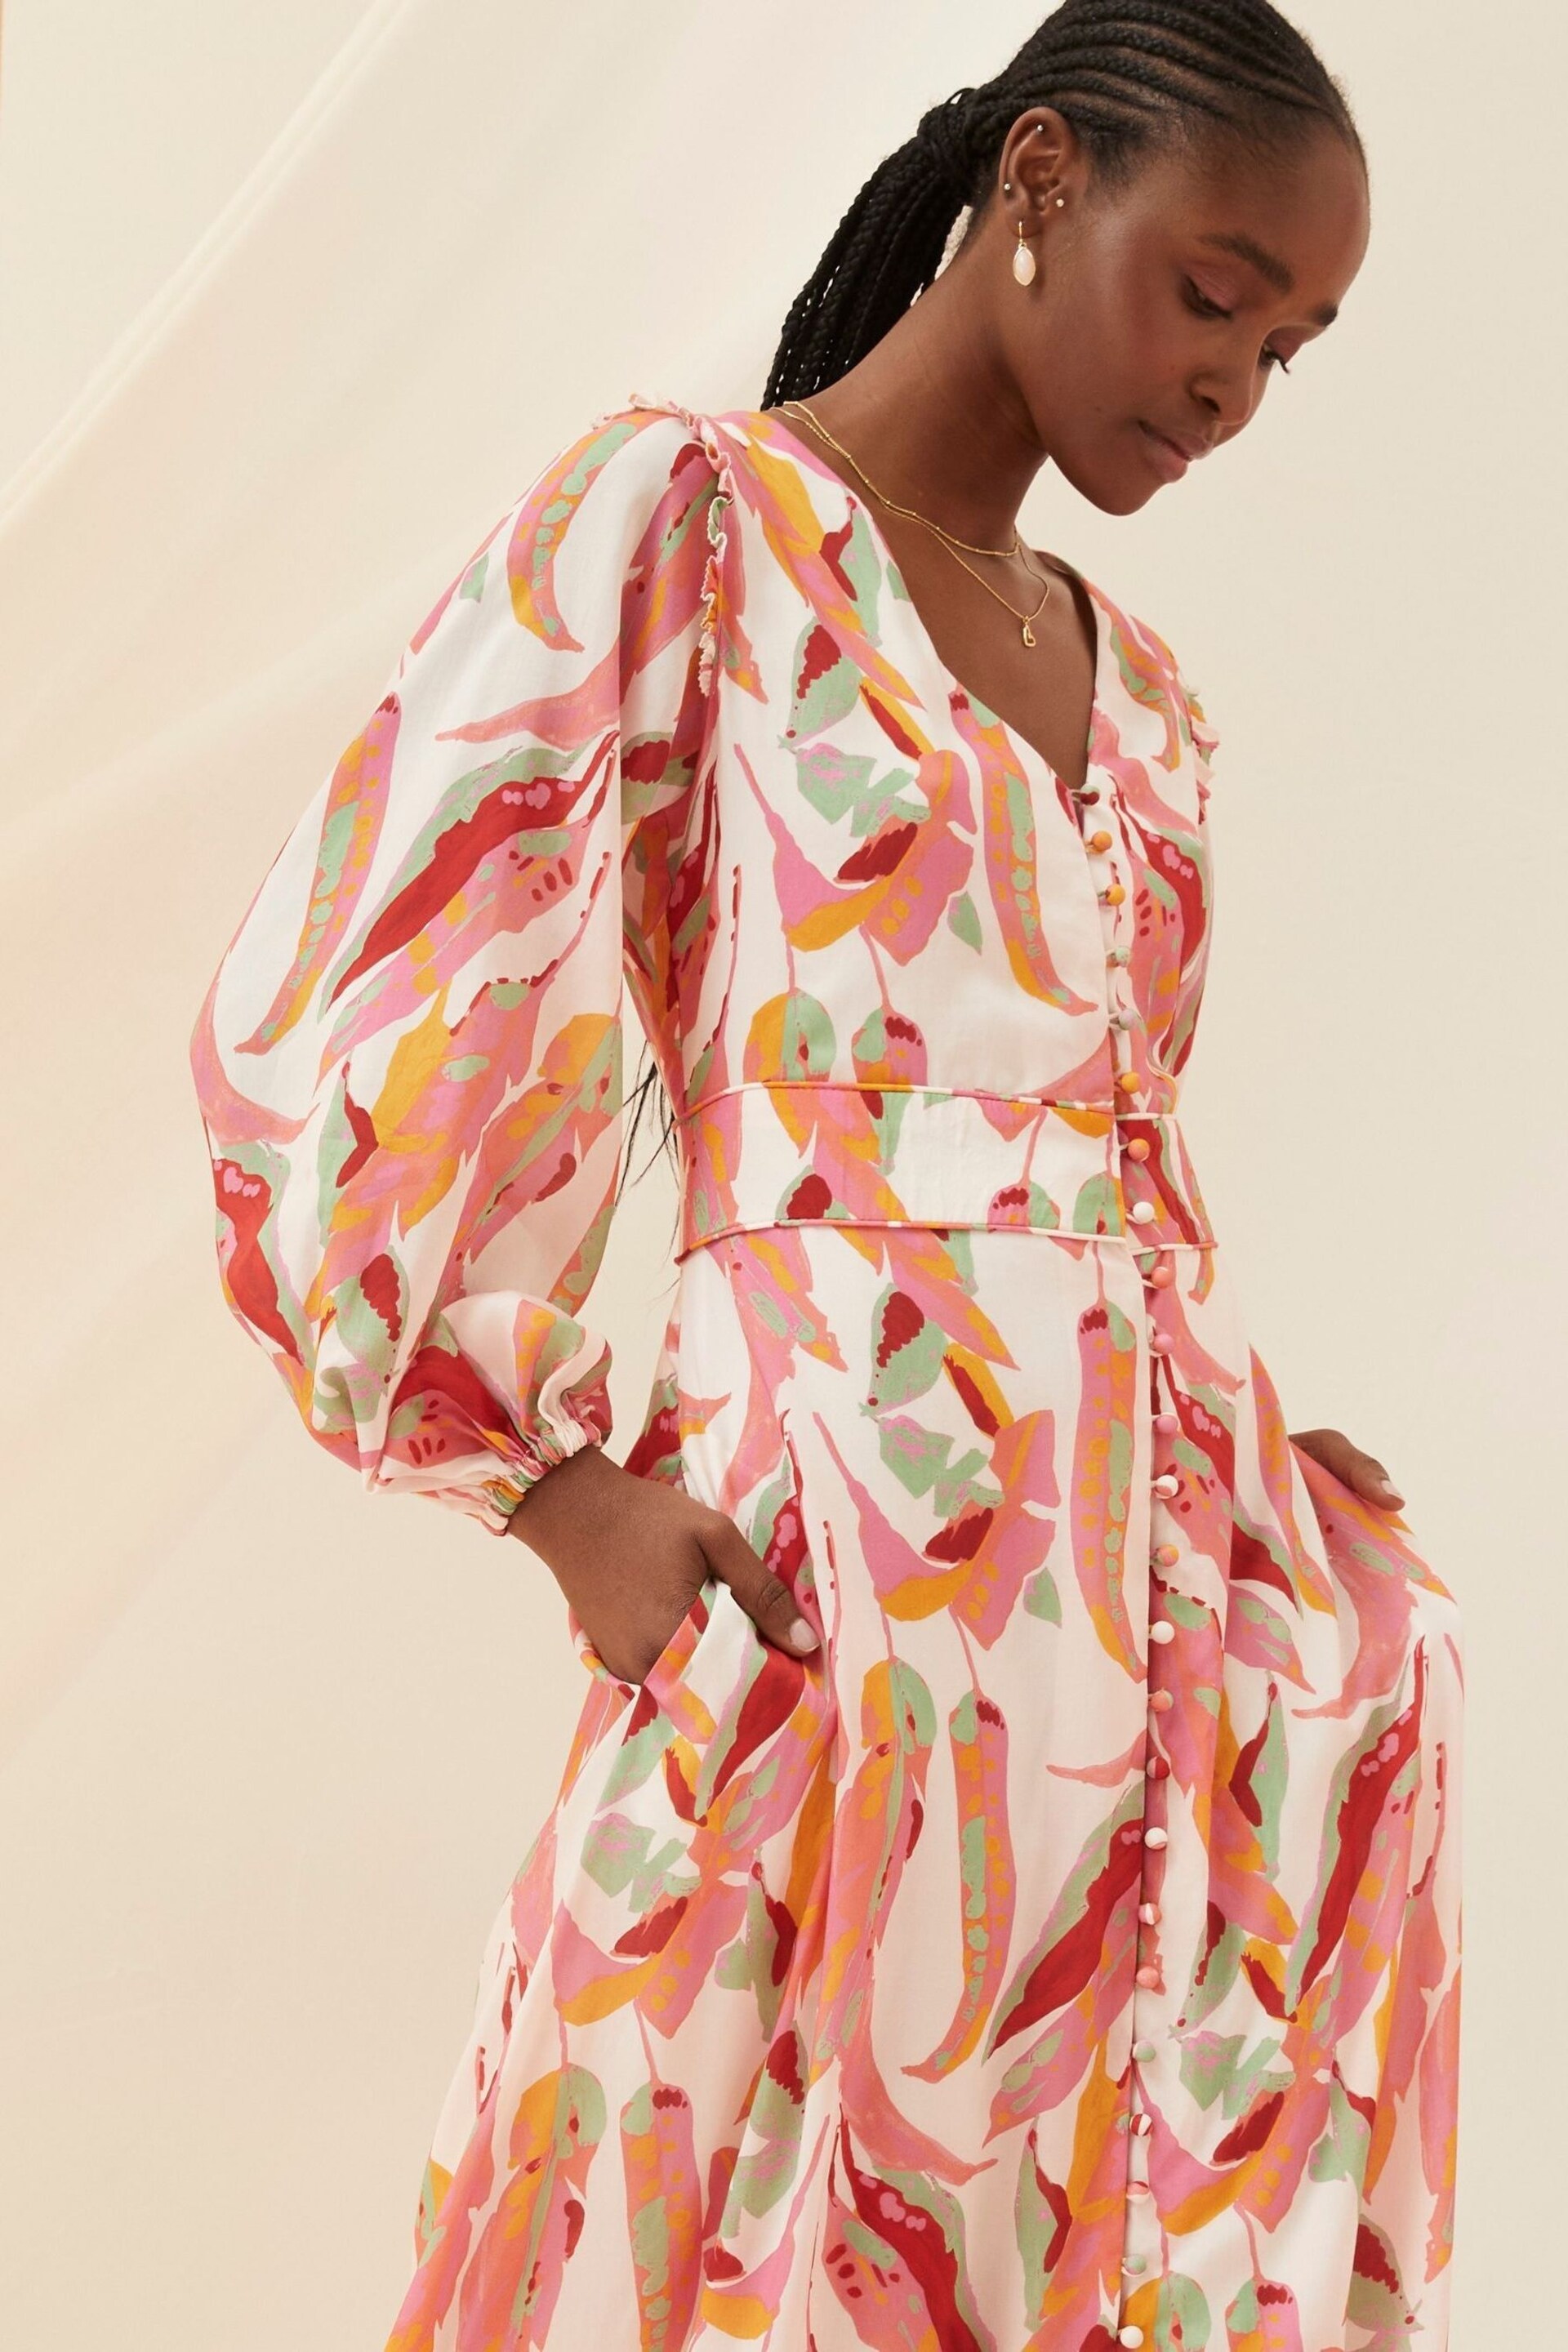 FatFace Pink Peony Painted Leaves Maxi Dress - Image 5 of 8